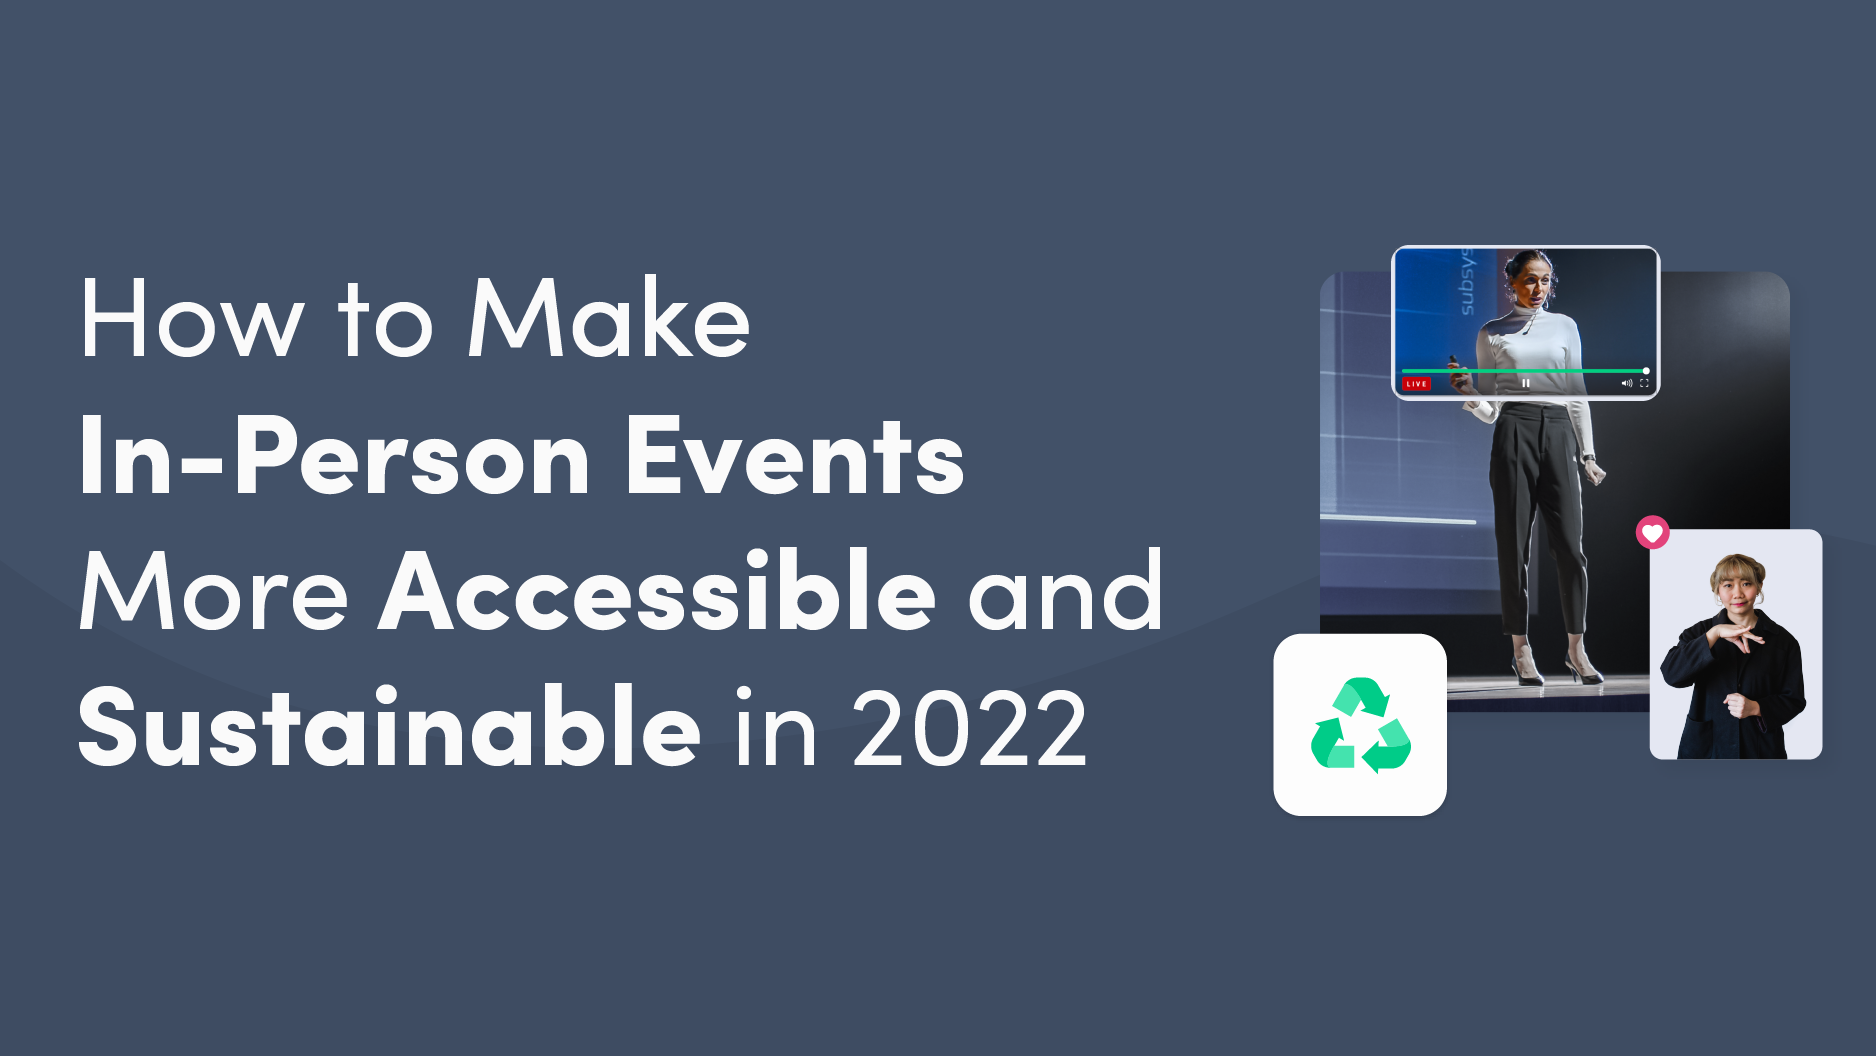 How to Make In-Person Events More Accessible and Sustainable in 2022